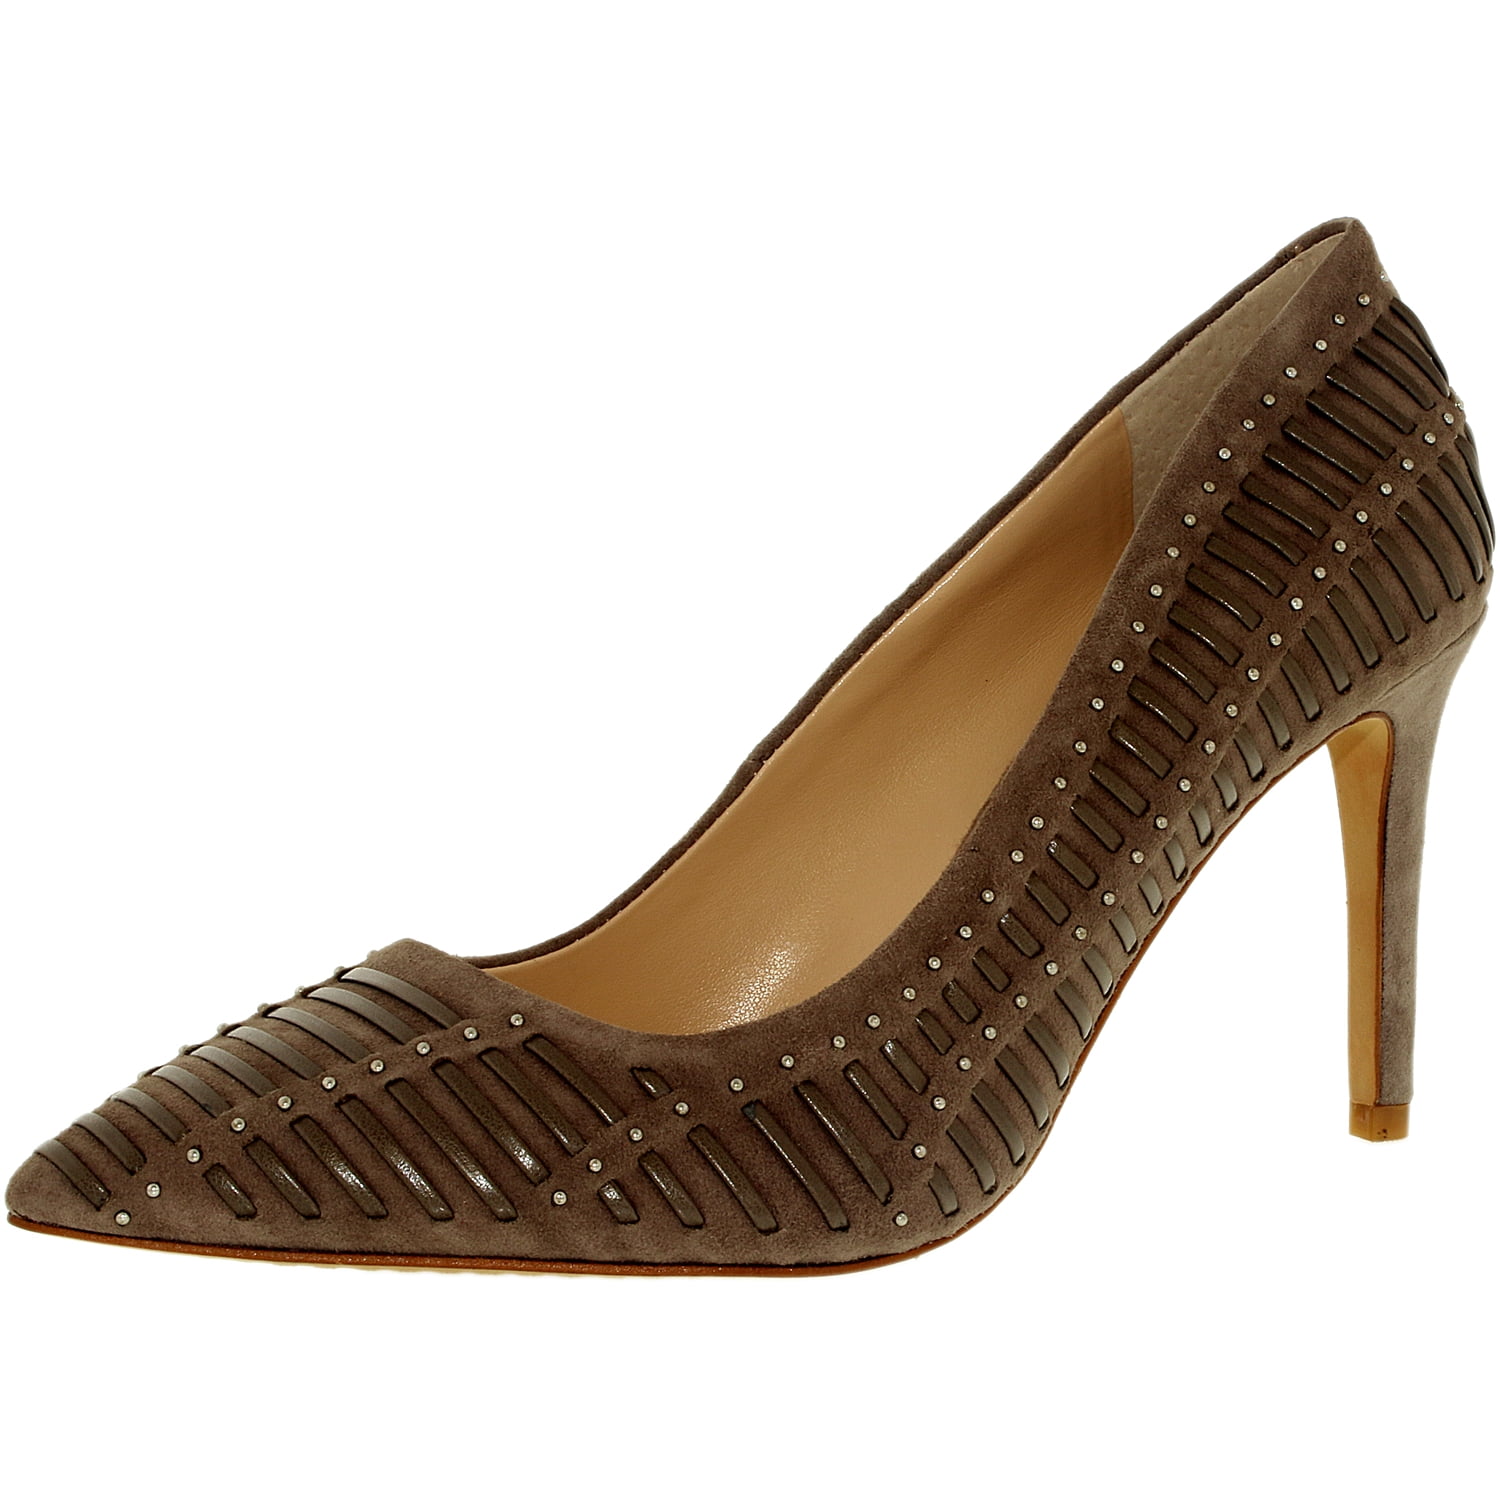 Vince Camuto Women's Narissa Leather Stone Taupe Ankle-High Pump - 8M ...